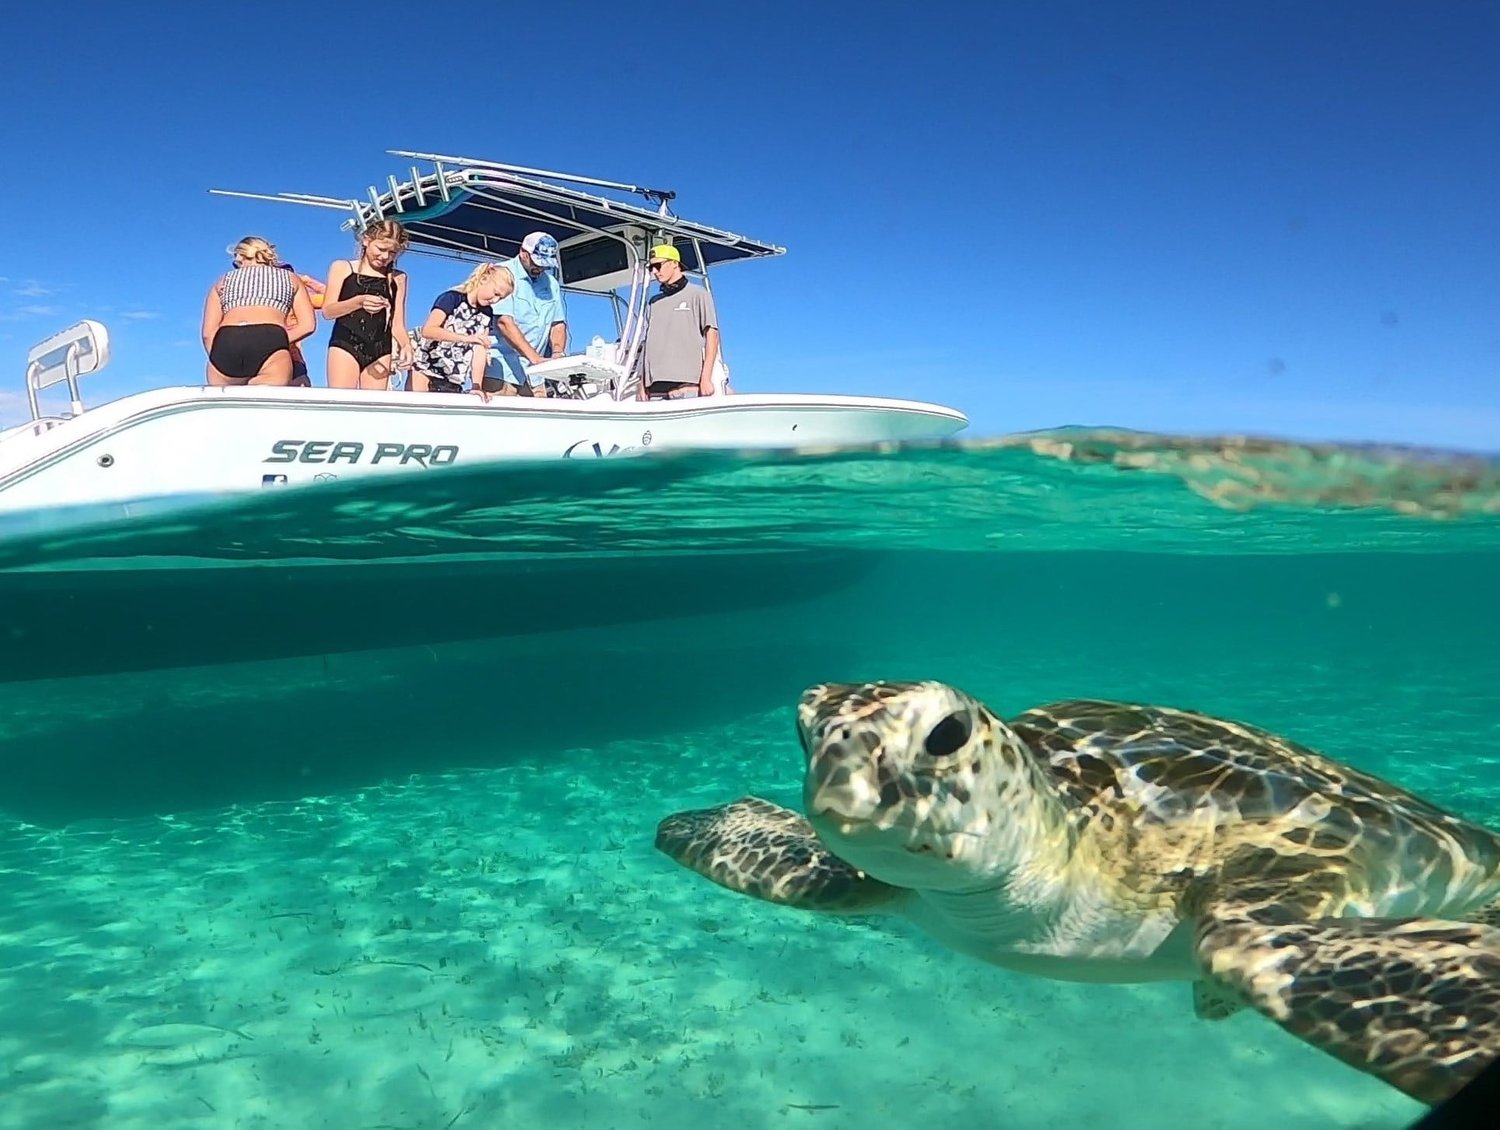 A group of people on a boat in the Bahamas with a turtle in the water.